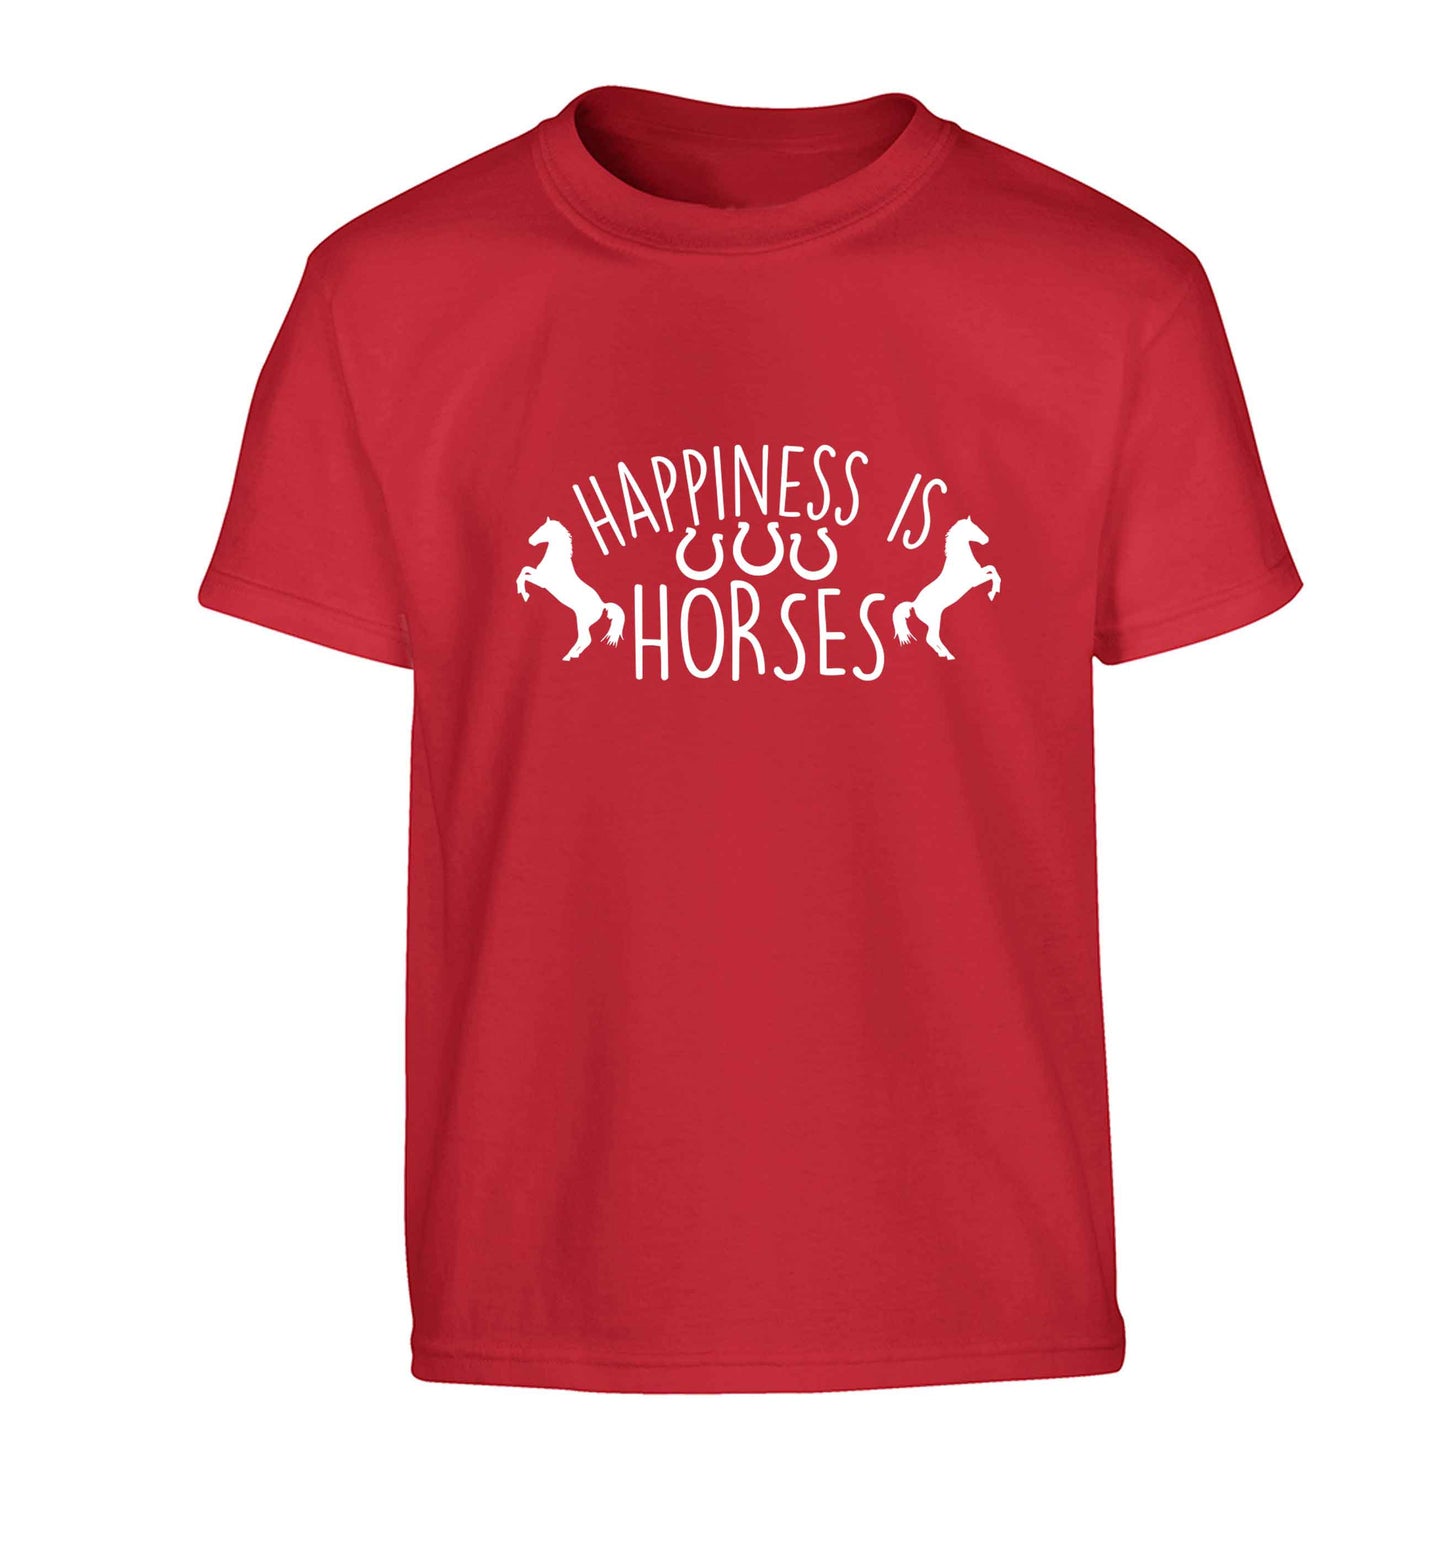 Happiness is horses Children's red Tshirt 12-13 Years